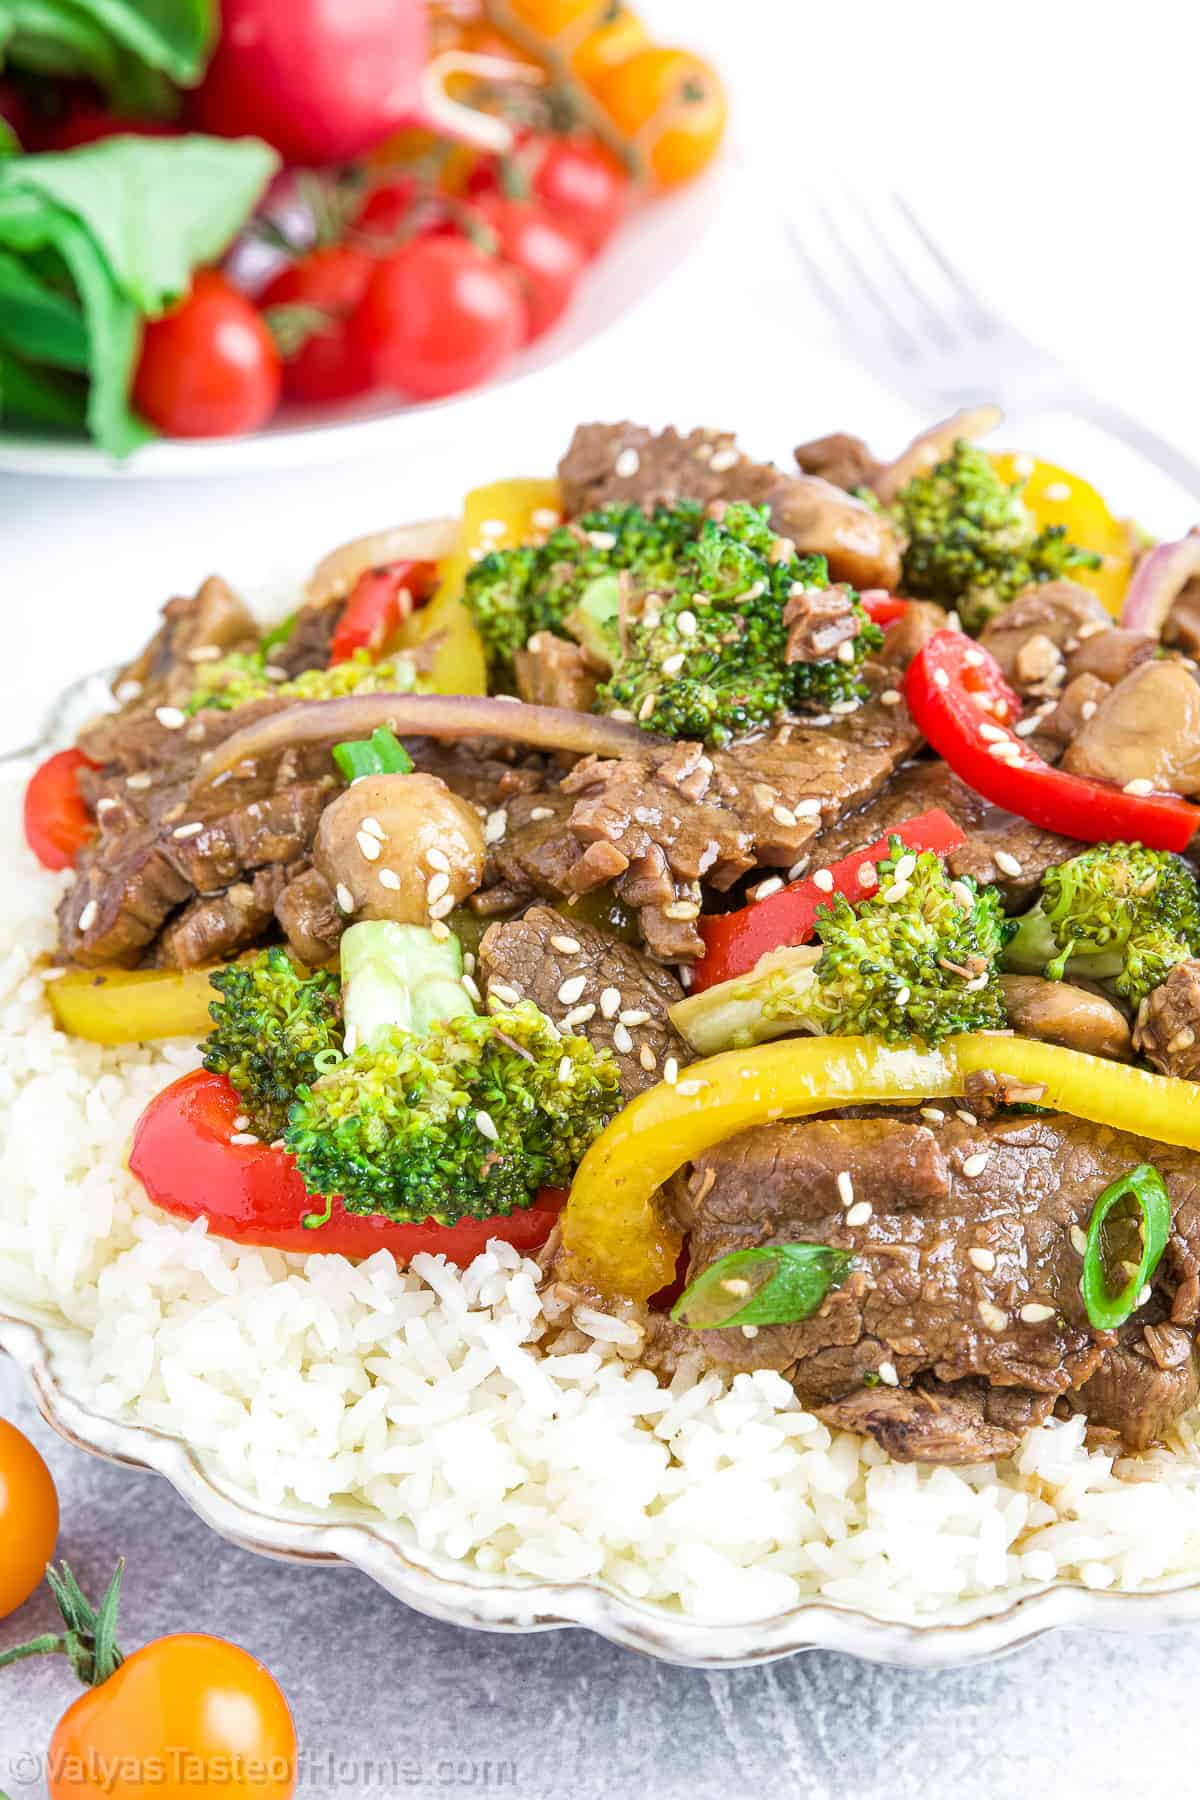 What sets this Beef Stir Fry recipe apart is the delicious stir fry sauce. Forget about store-bought sauces - this homemade version, with its carefully balanced blend of soy sauce, sesame oil, maple syrup, beef bouillon, garlic, and ginger, will make sure you get the tastiest beef stir fry. 